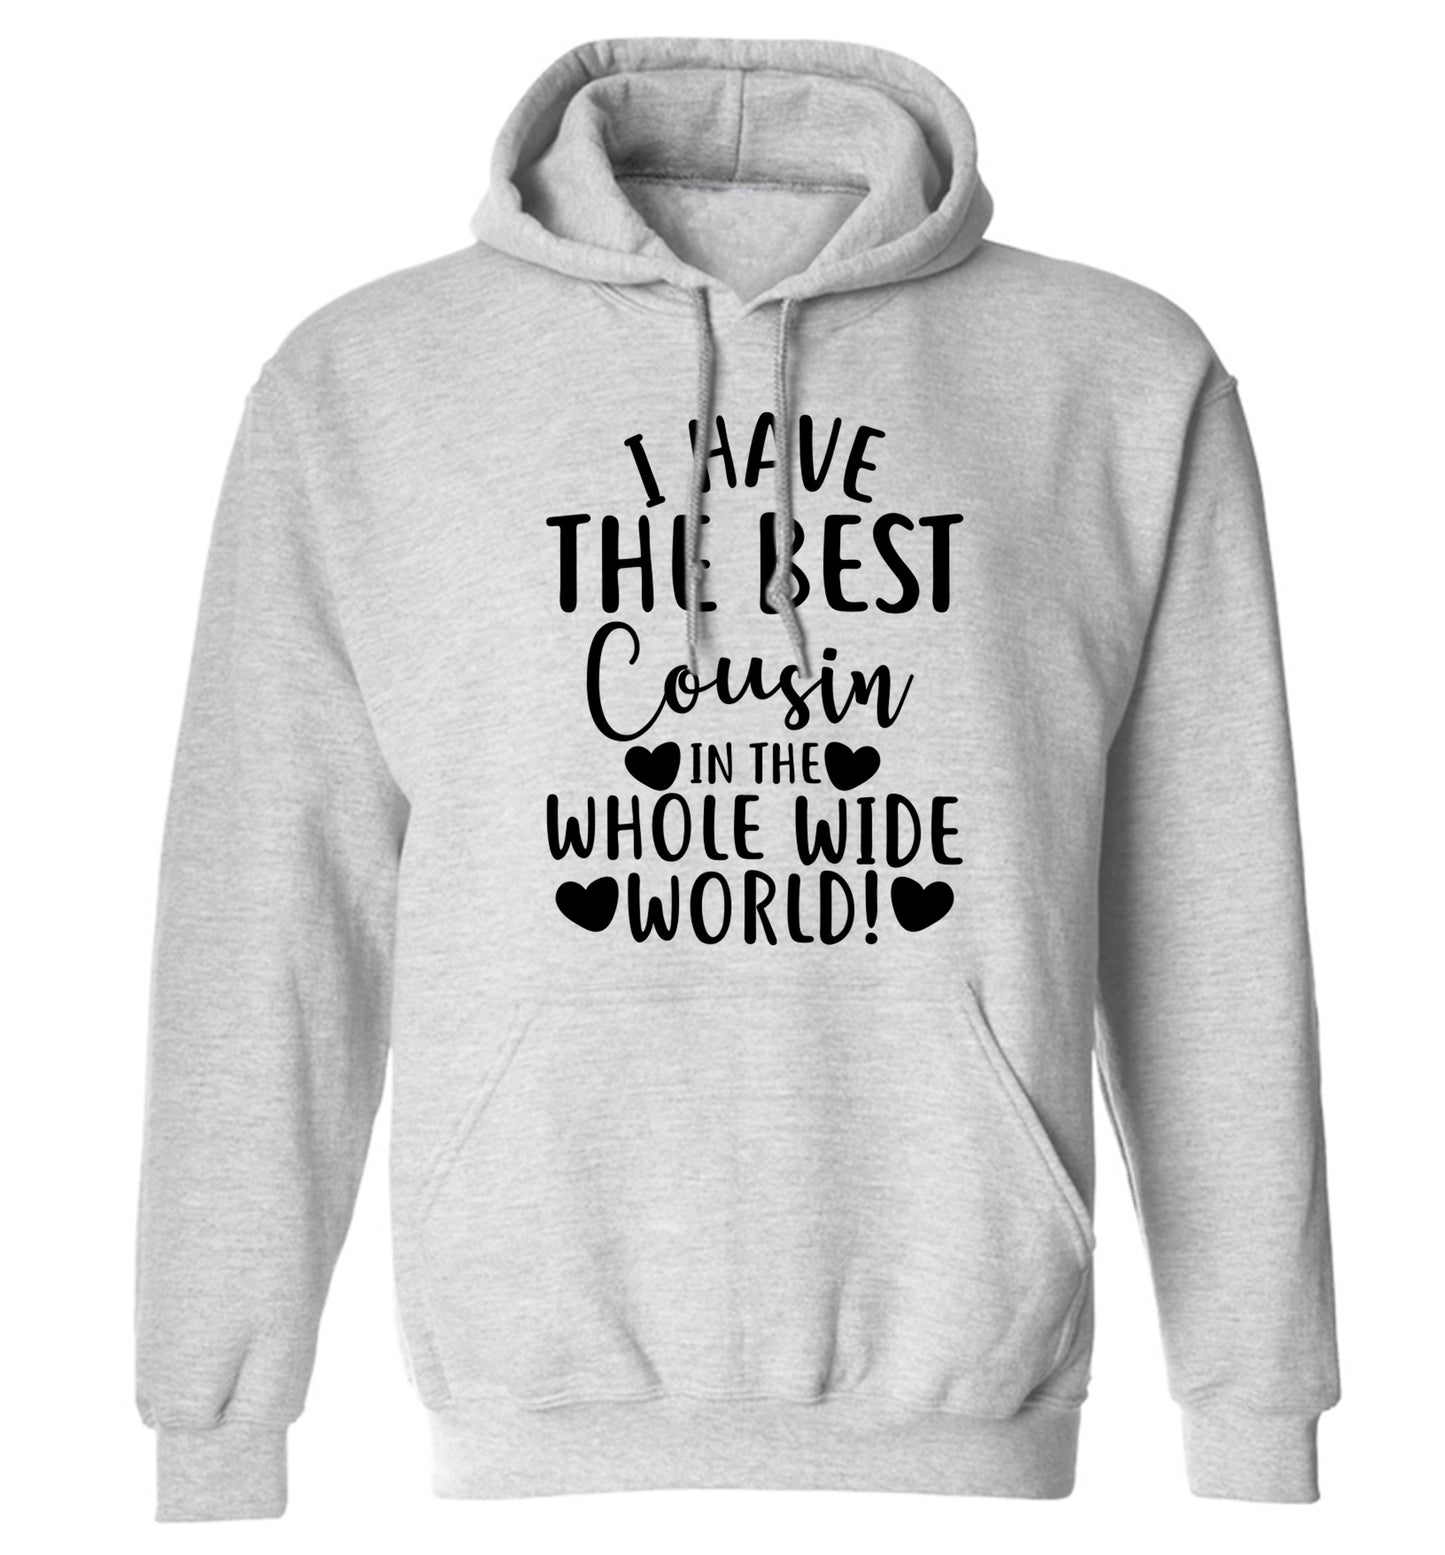 I have the best cousin in the whole wide world! adults unisex grey hoodie 2XL